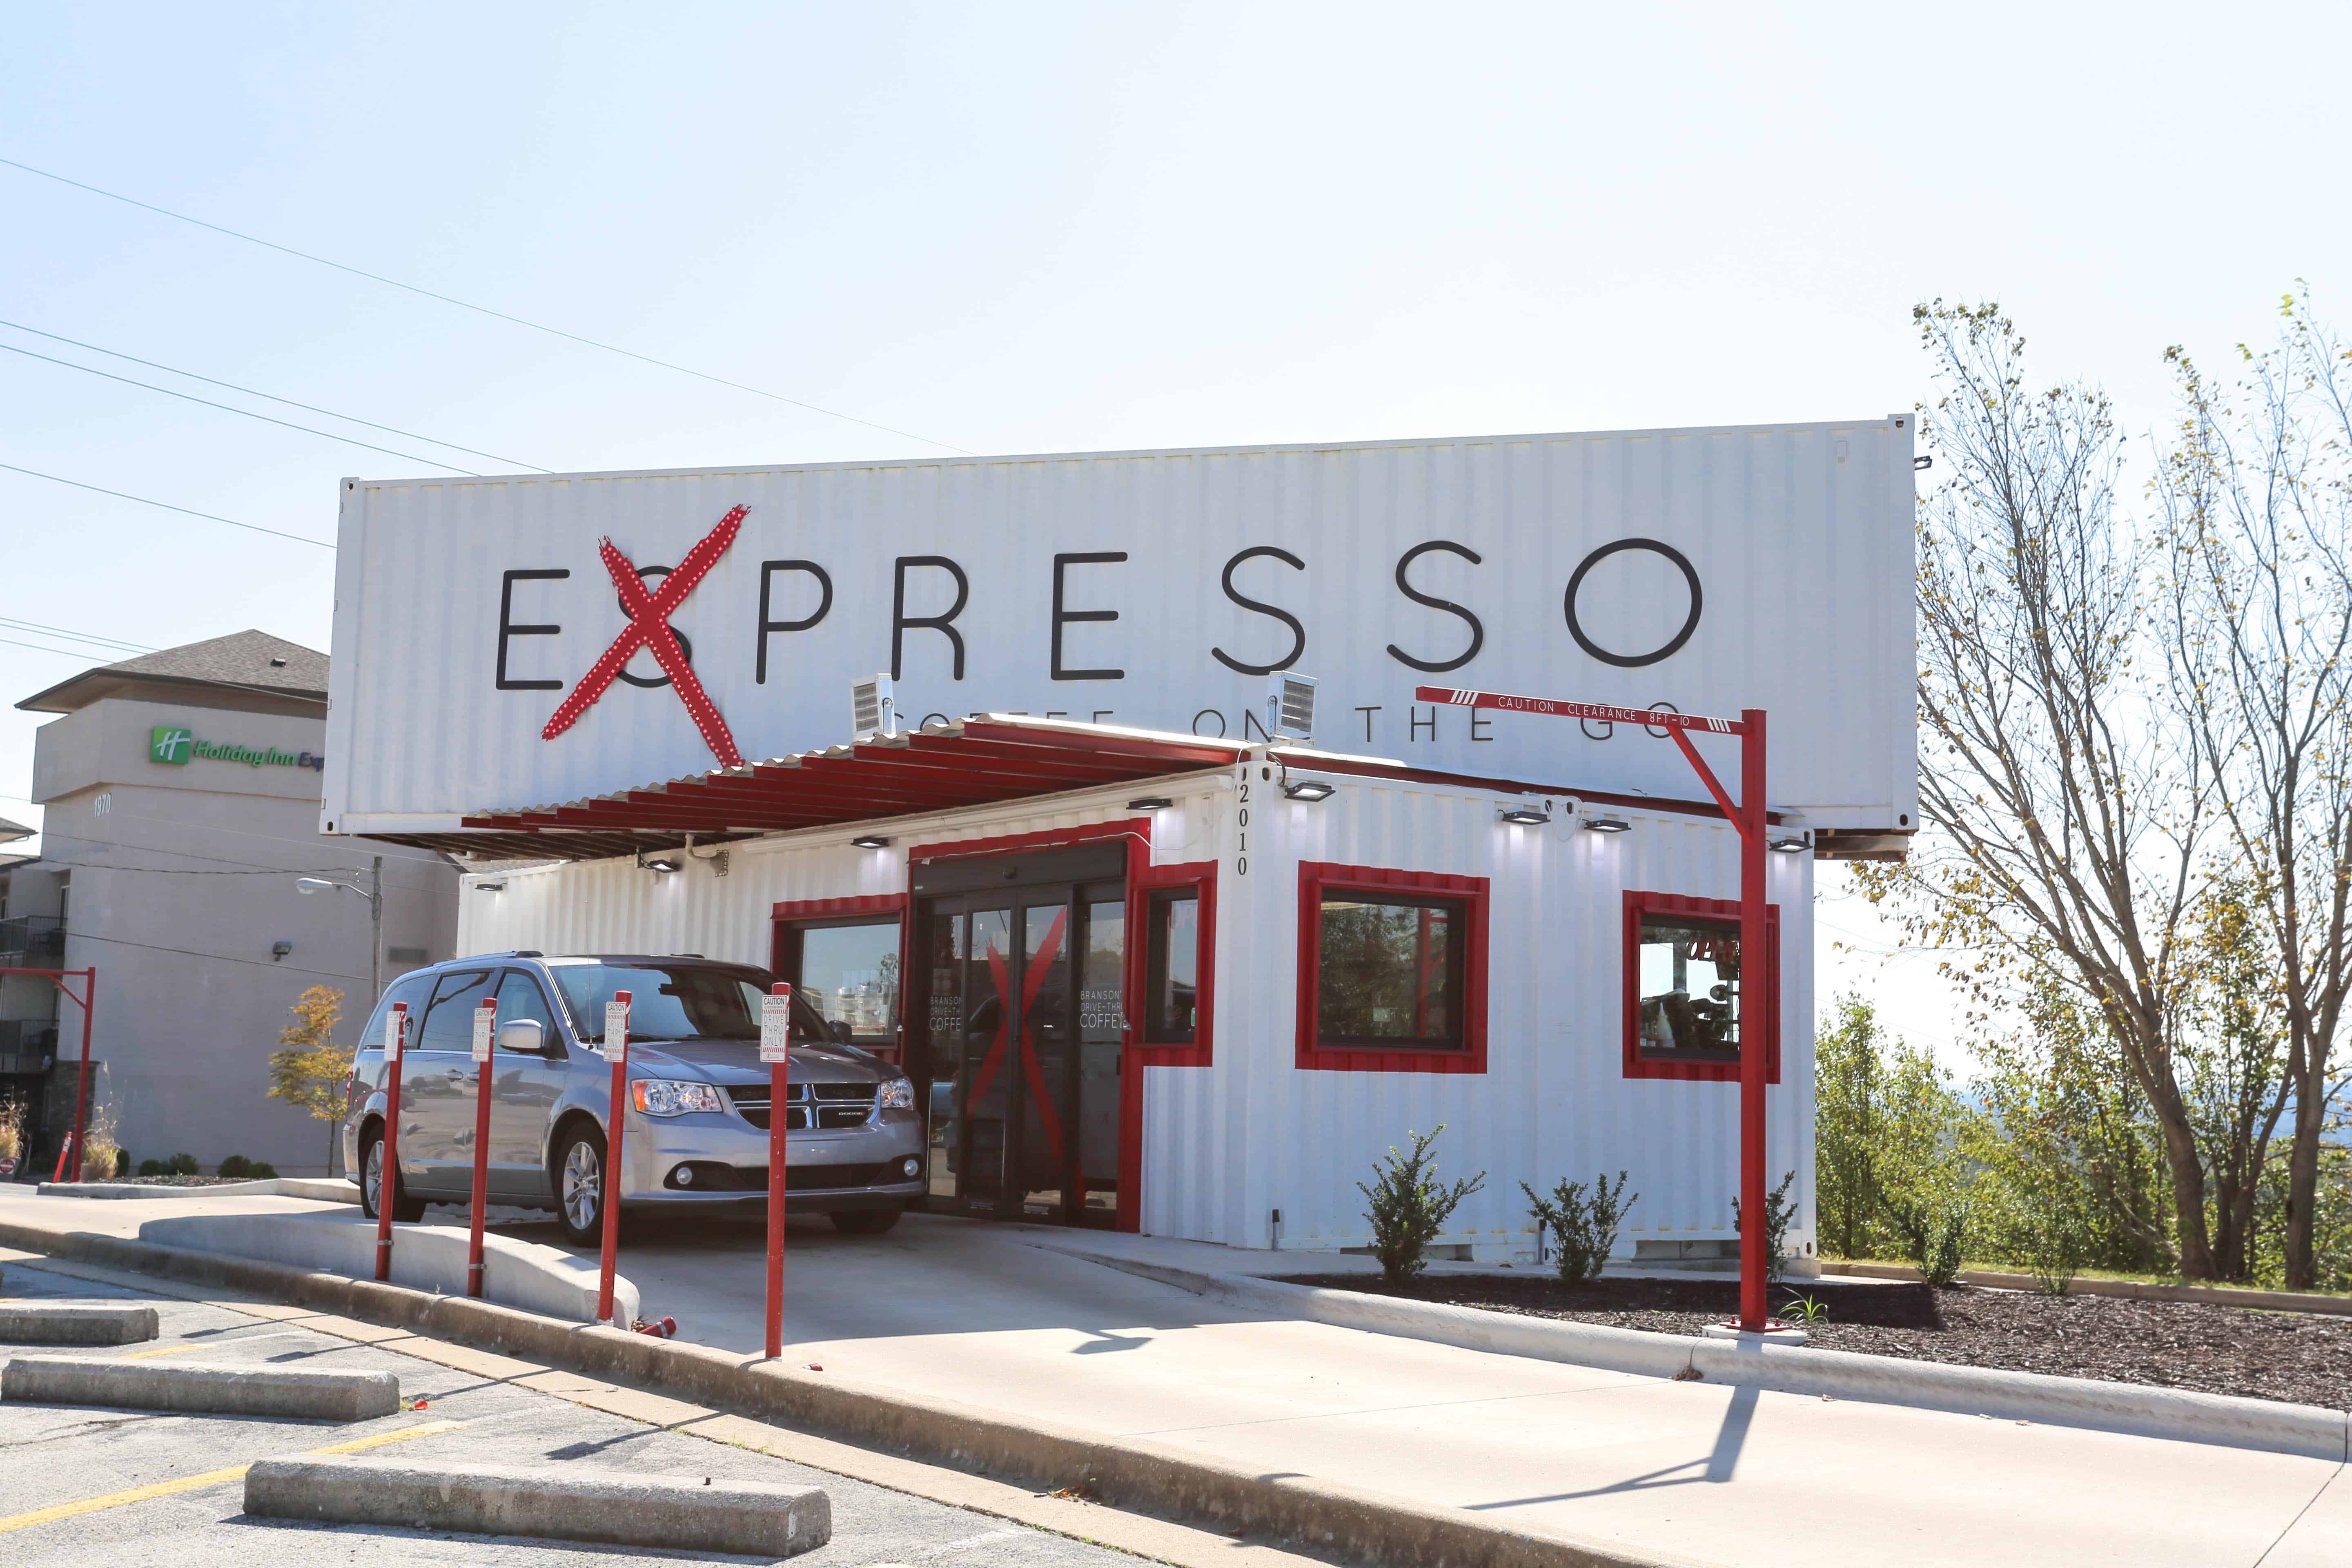 Expresso coffee storefront